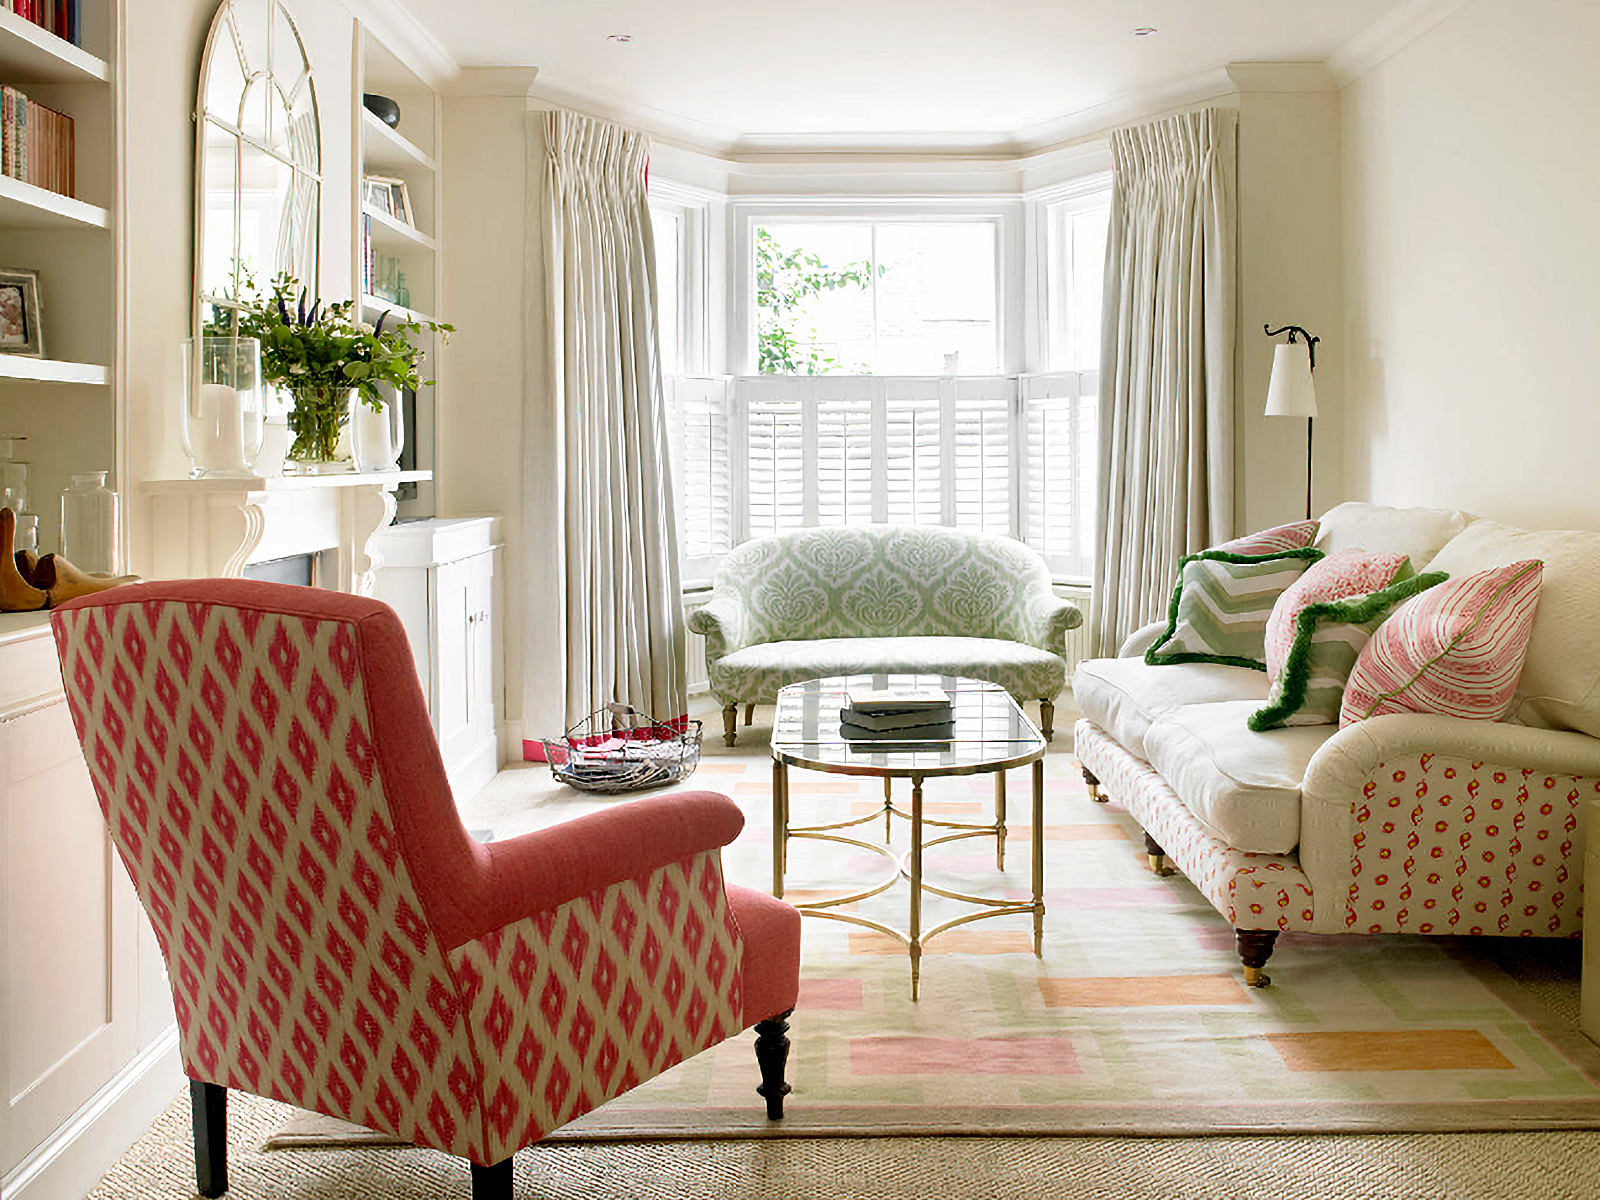 English style living room in pastels